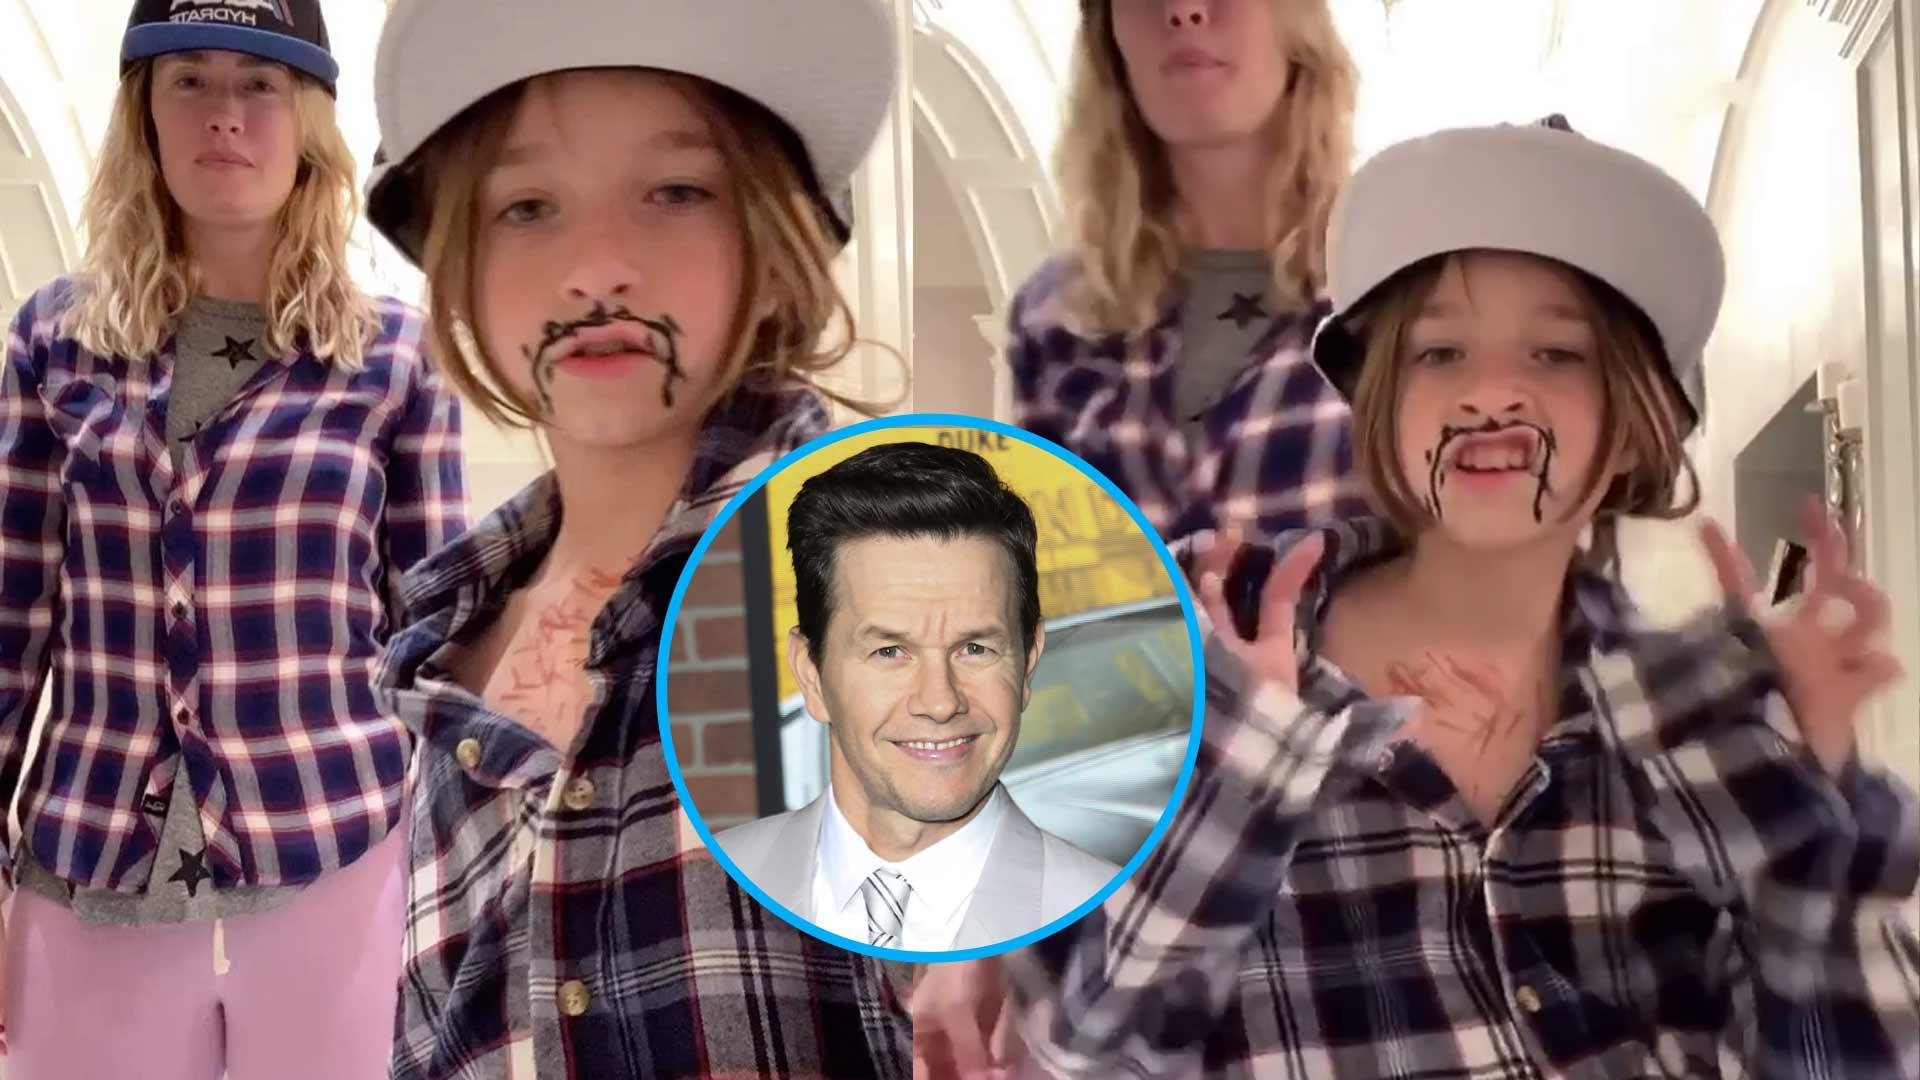 Mark Wahlberg Utterly Confused By Daughter’s Carole Baskin TikTok Dance: ‘Tell Me What This Is?’